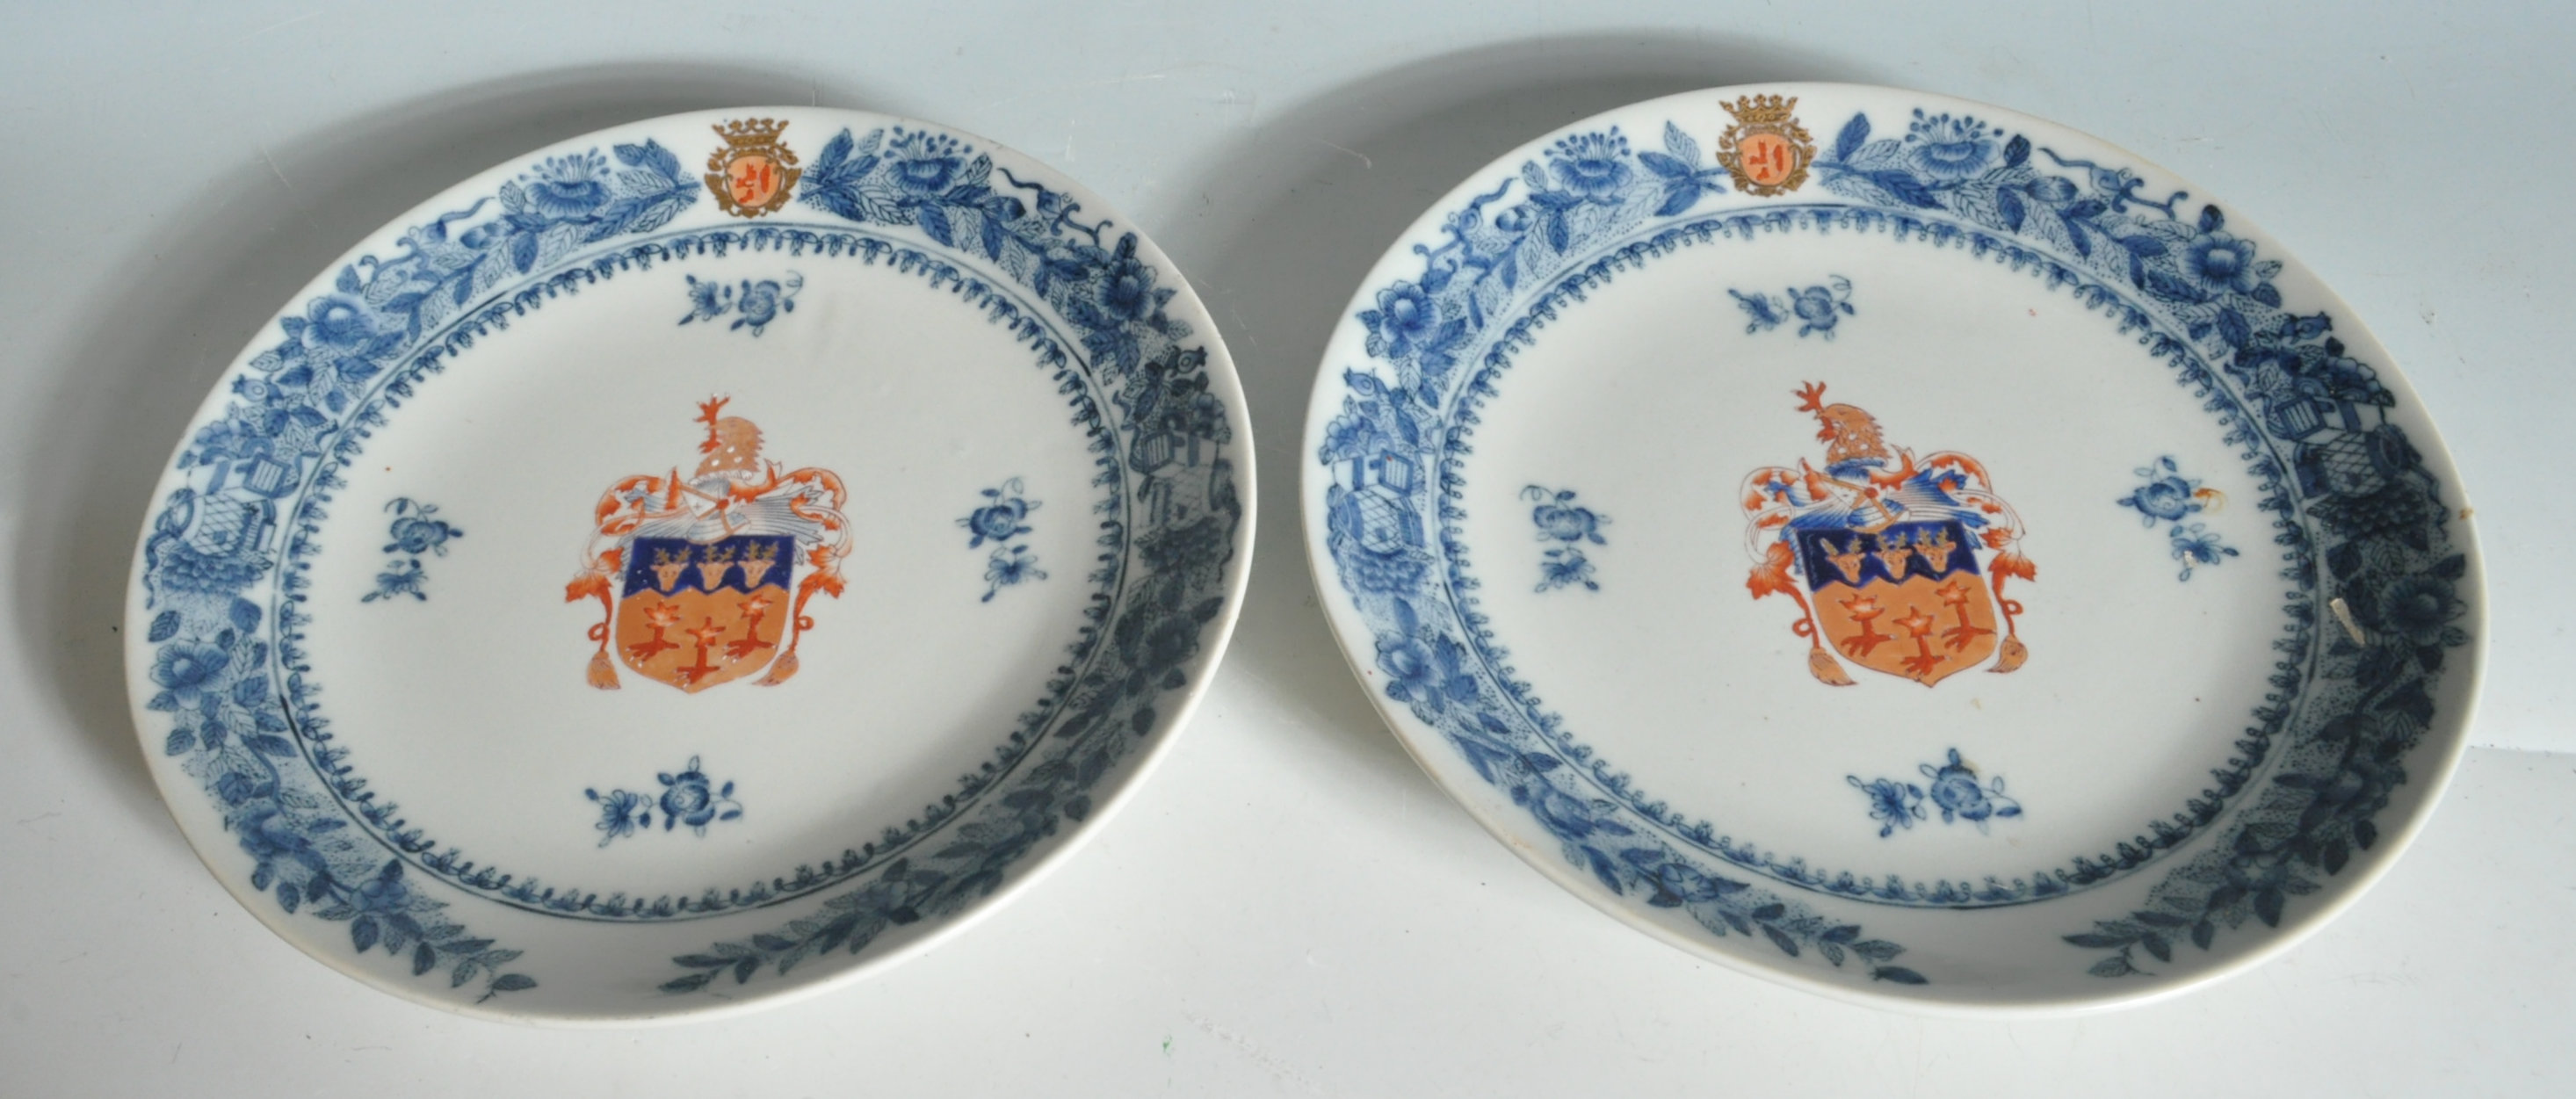 PAIR OF 20TH CENTURY CHINESE BLUE AND WHITE PLATES